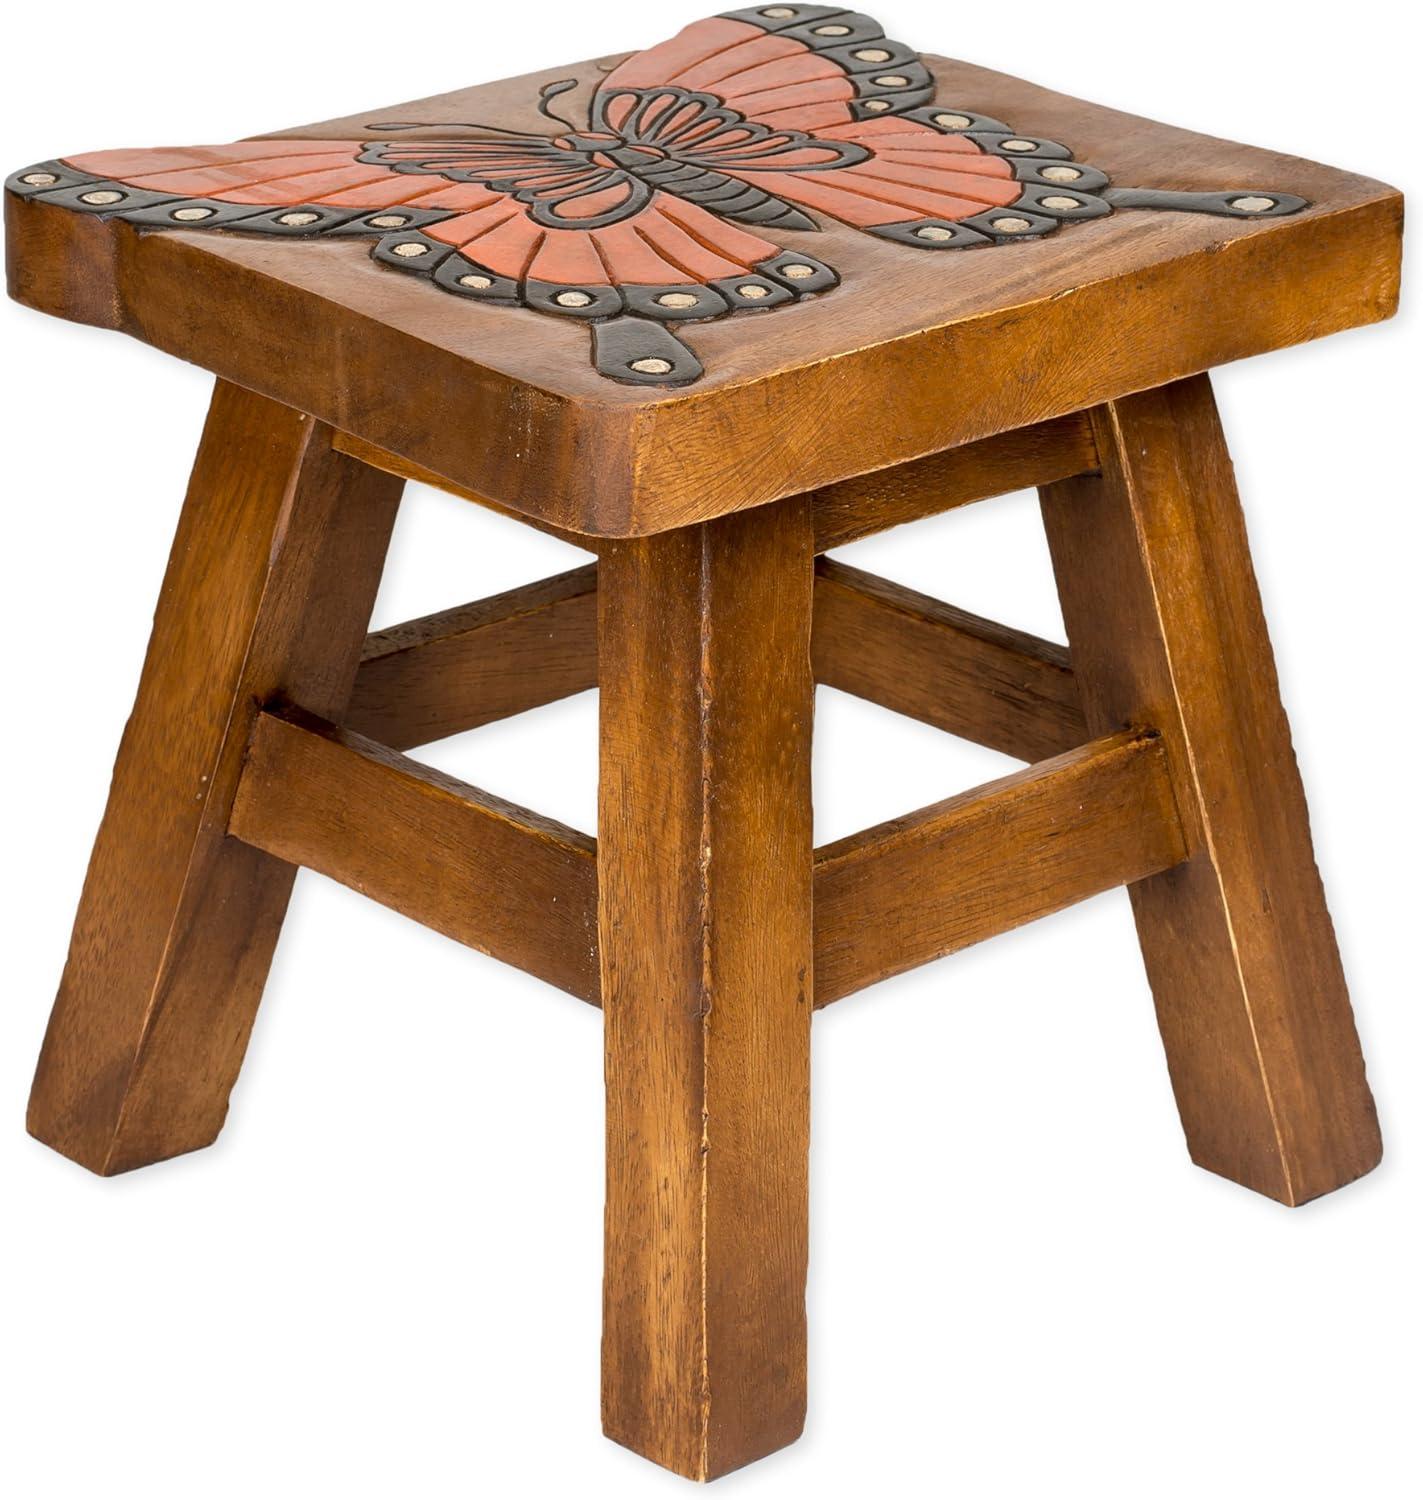 Monarch Butterfly 10" Square Acacia Wood Decorative Stool